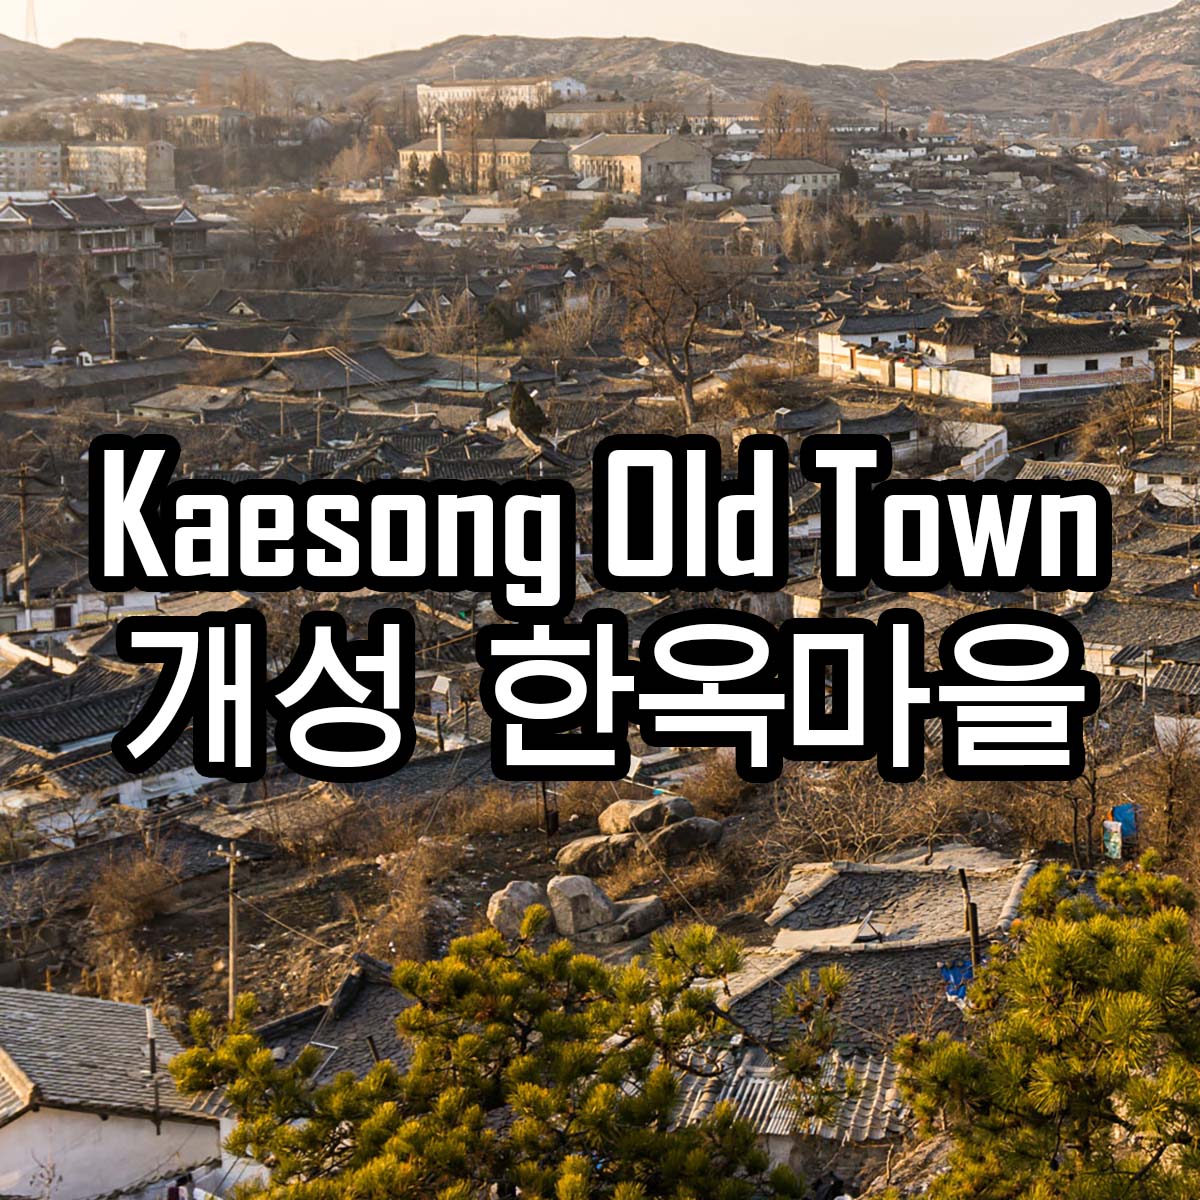 Kaesong Old Town